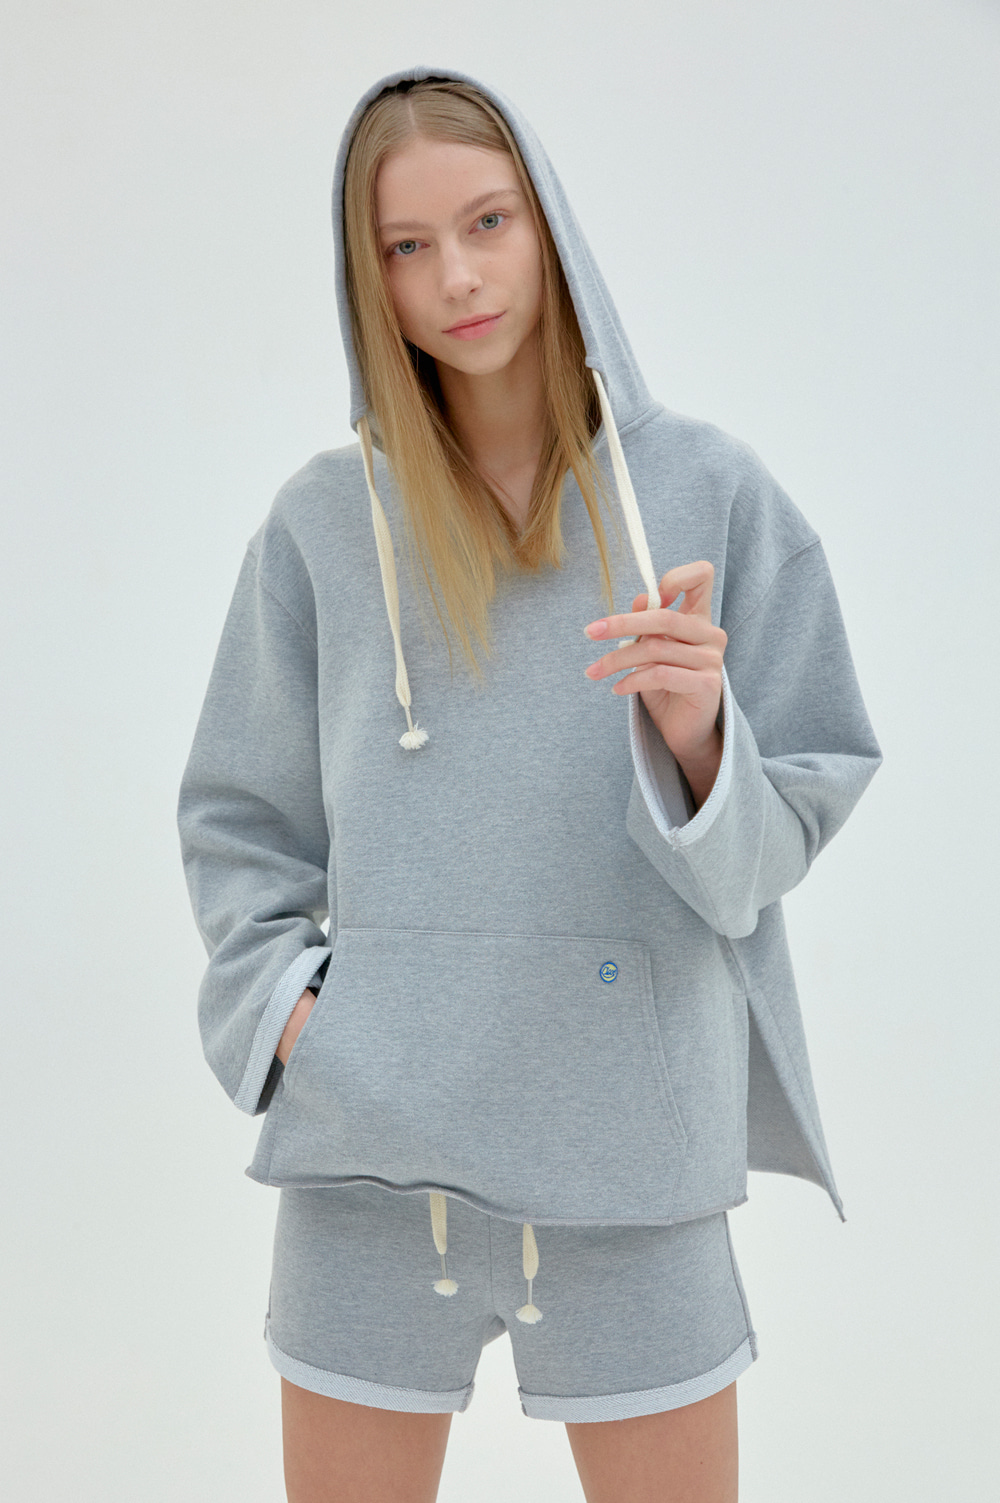 clove - Cooling Cotton Hoody  (Gray)